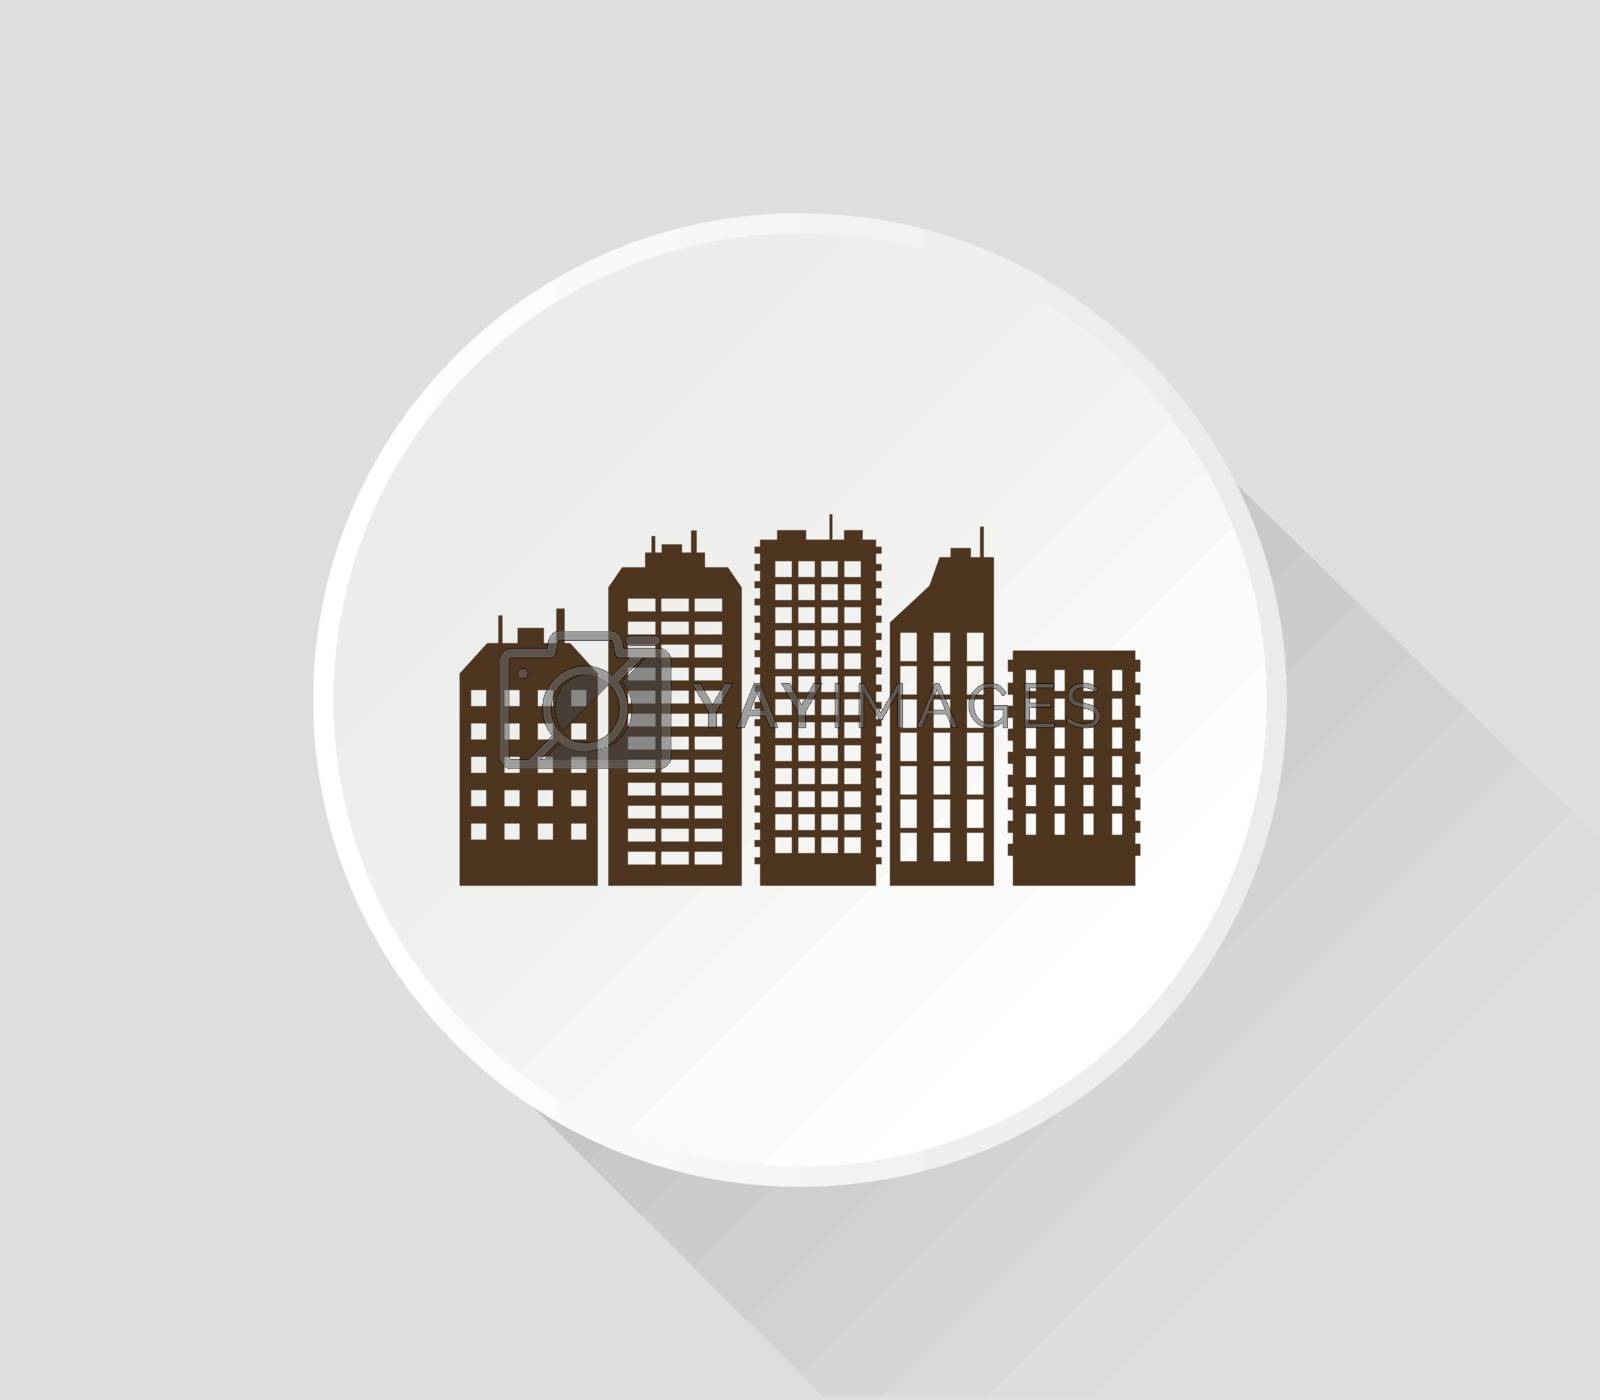 Royalty free image of skyscraper icon by Mark1987